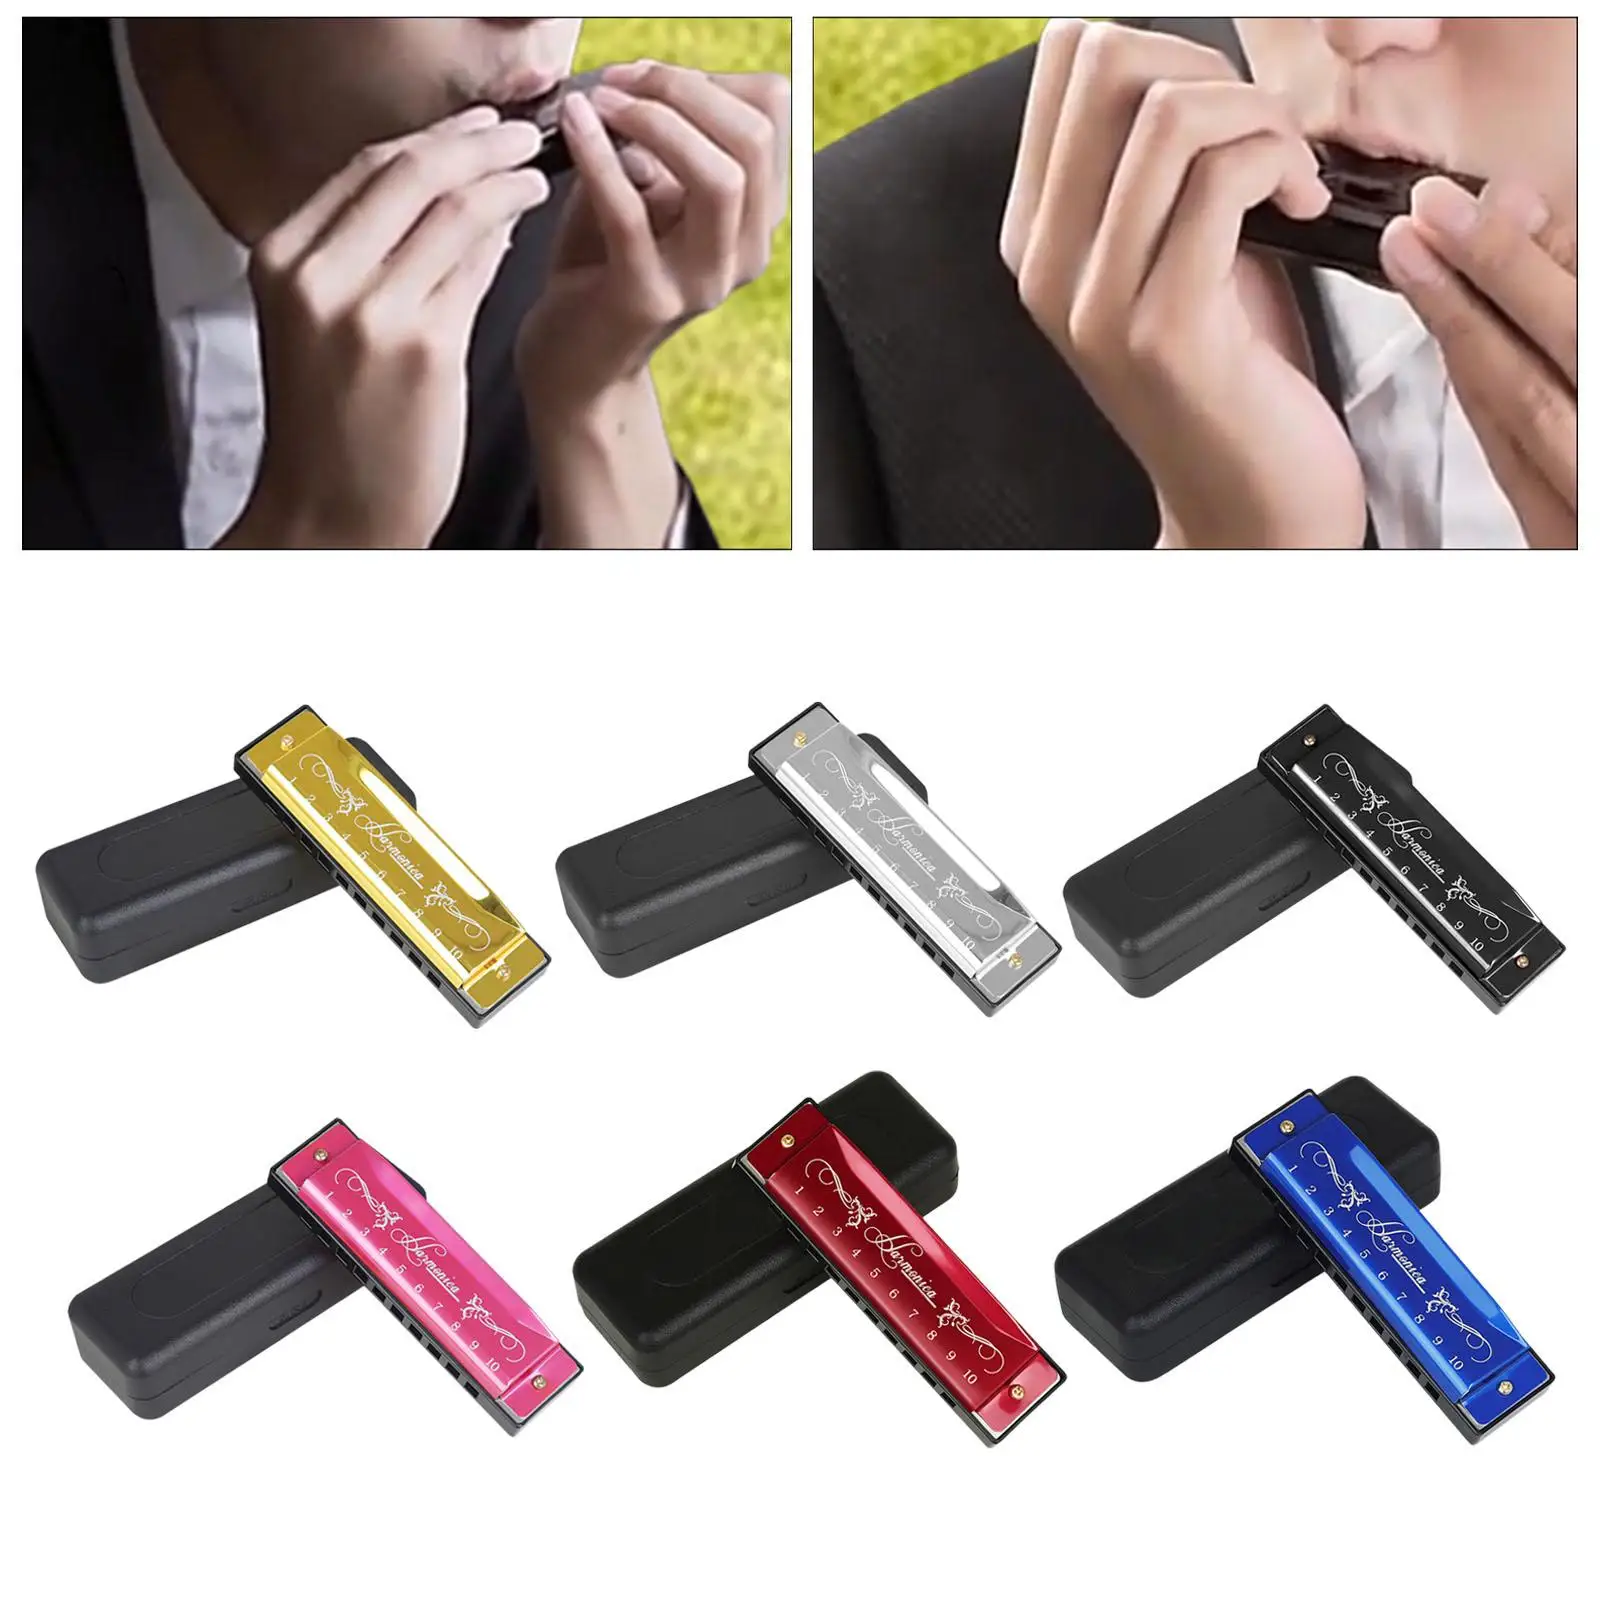 Harmonica Mouth Organ Practical Party Favors Instrument C Key 10 Holes 20 Tunes